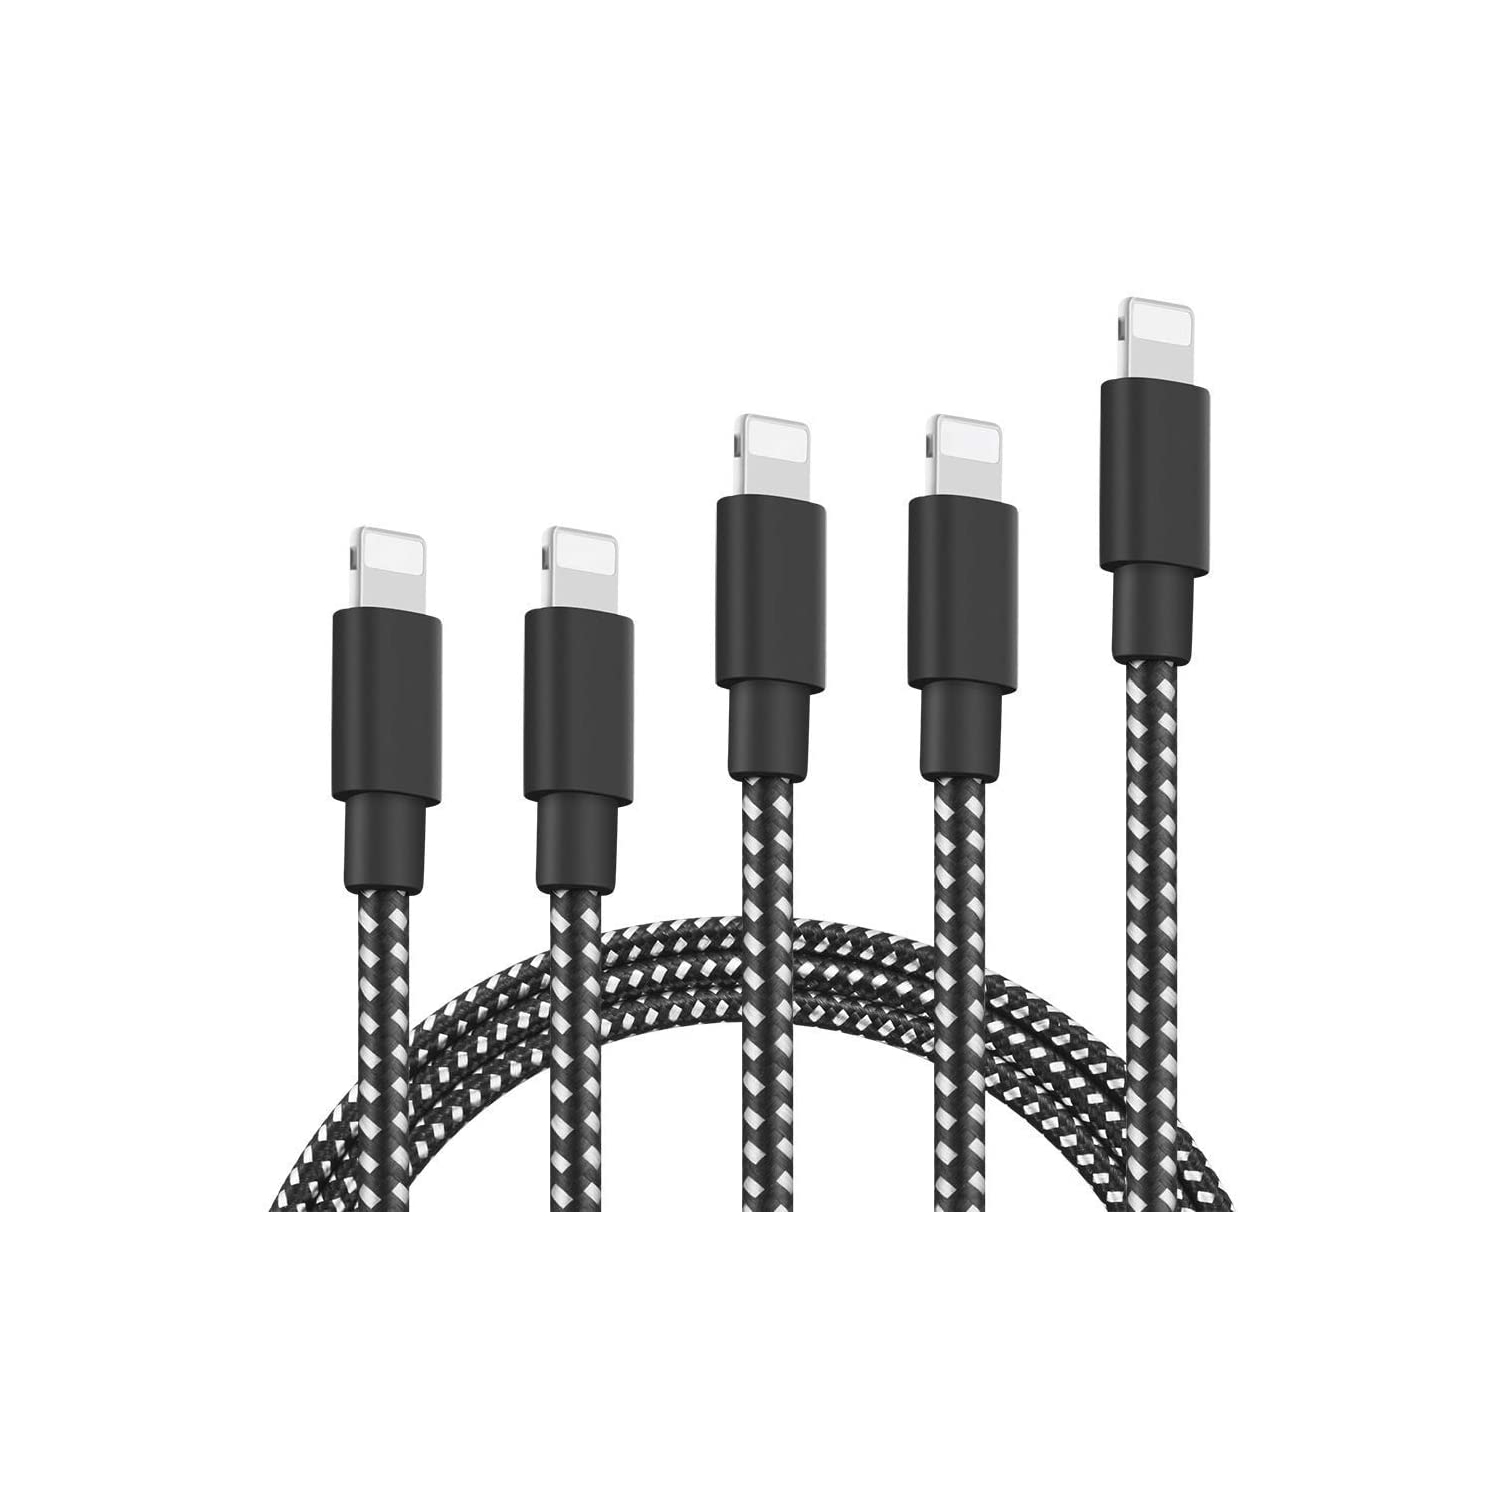 Phone Charger 【5Pack】 3FT 3FT 6FT 6FT 10FT Nylon Braided USB Charging & Syncing Cable Compatible with Phone 11 Pro Max 11 Pro 11 XS MAX XR X 8 8 Plus 7 7 Plus 6s 6s Plus 6 6 Plus and More